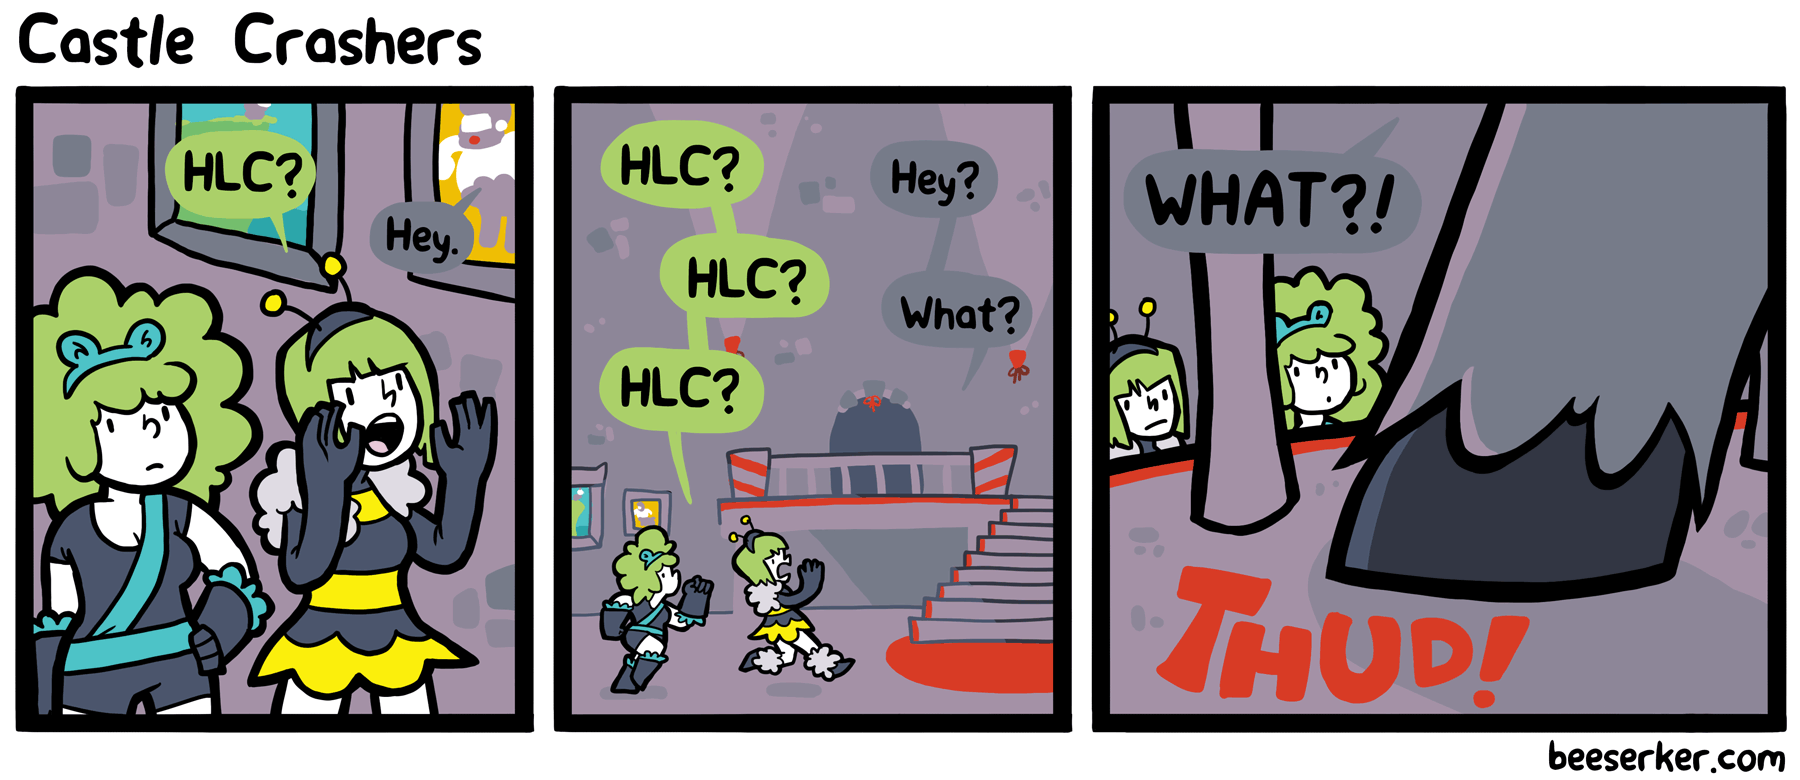 If Trigona looks freaked out in the last panel, it's just because she'd never seen stairs before.